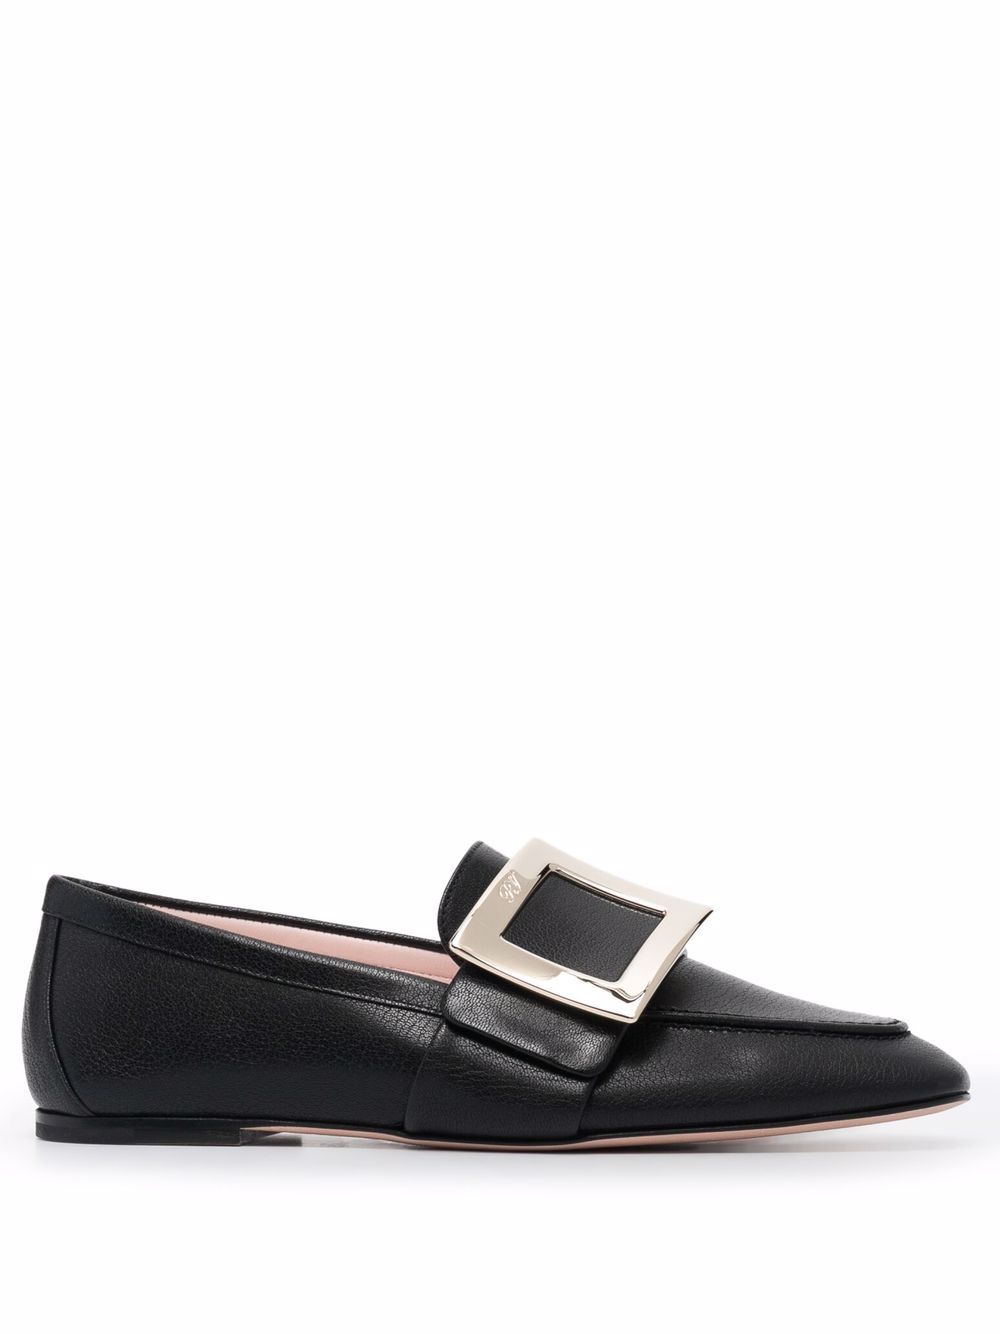 Metal Buckle Leather Loafers дамски обувки Roger Vivier 842584509_35